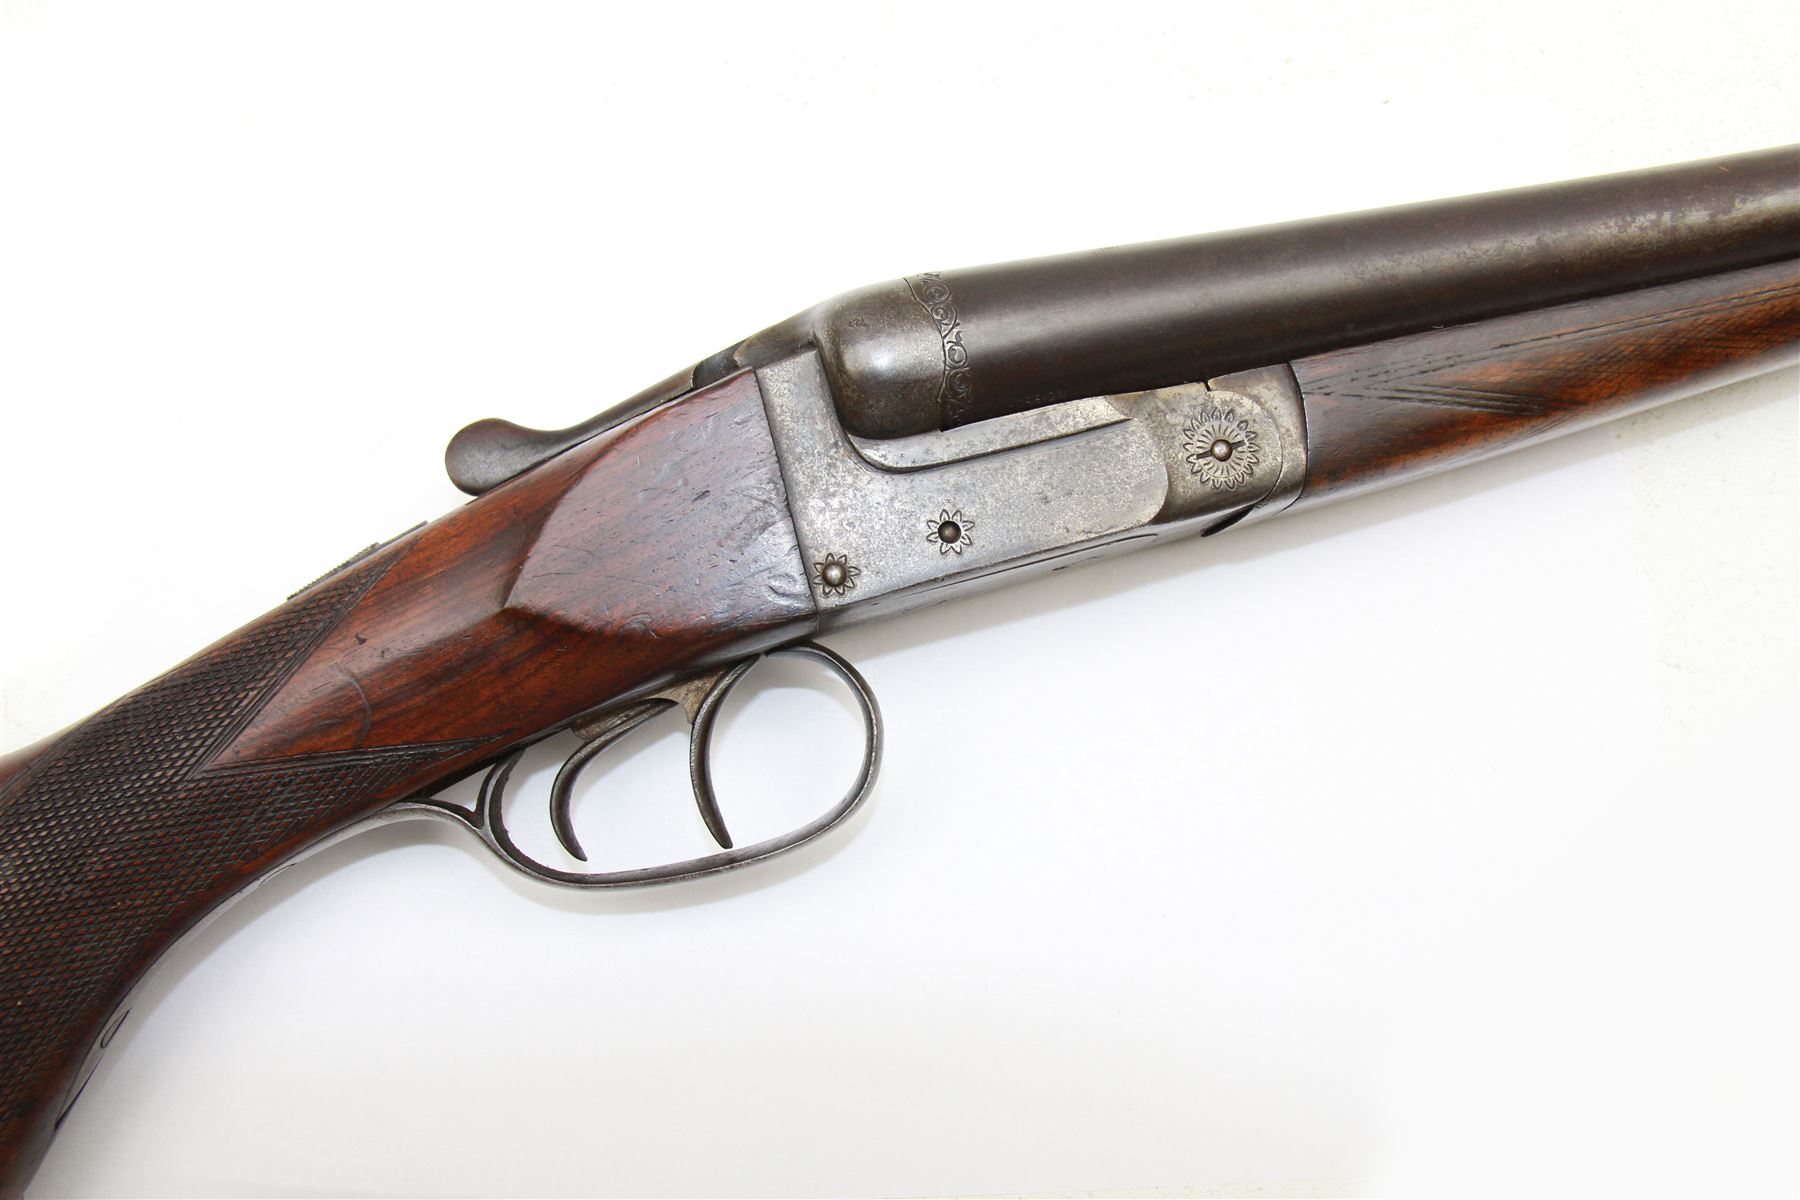 SHOTGUN CERTIFICATE REQUIRED - foreign 12-bore double trigger side by side double barrel shotgun ser